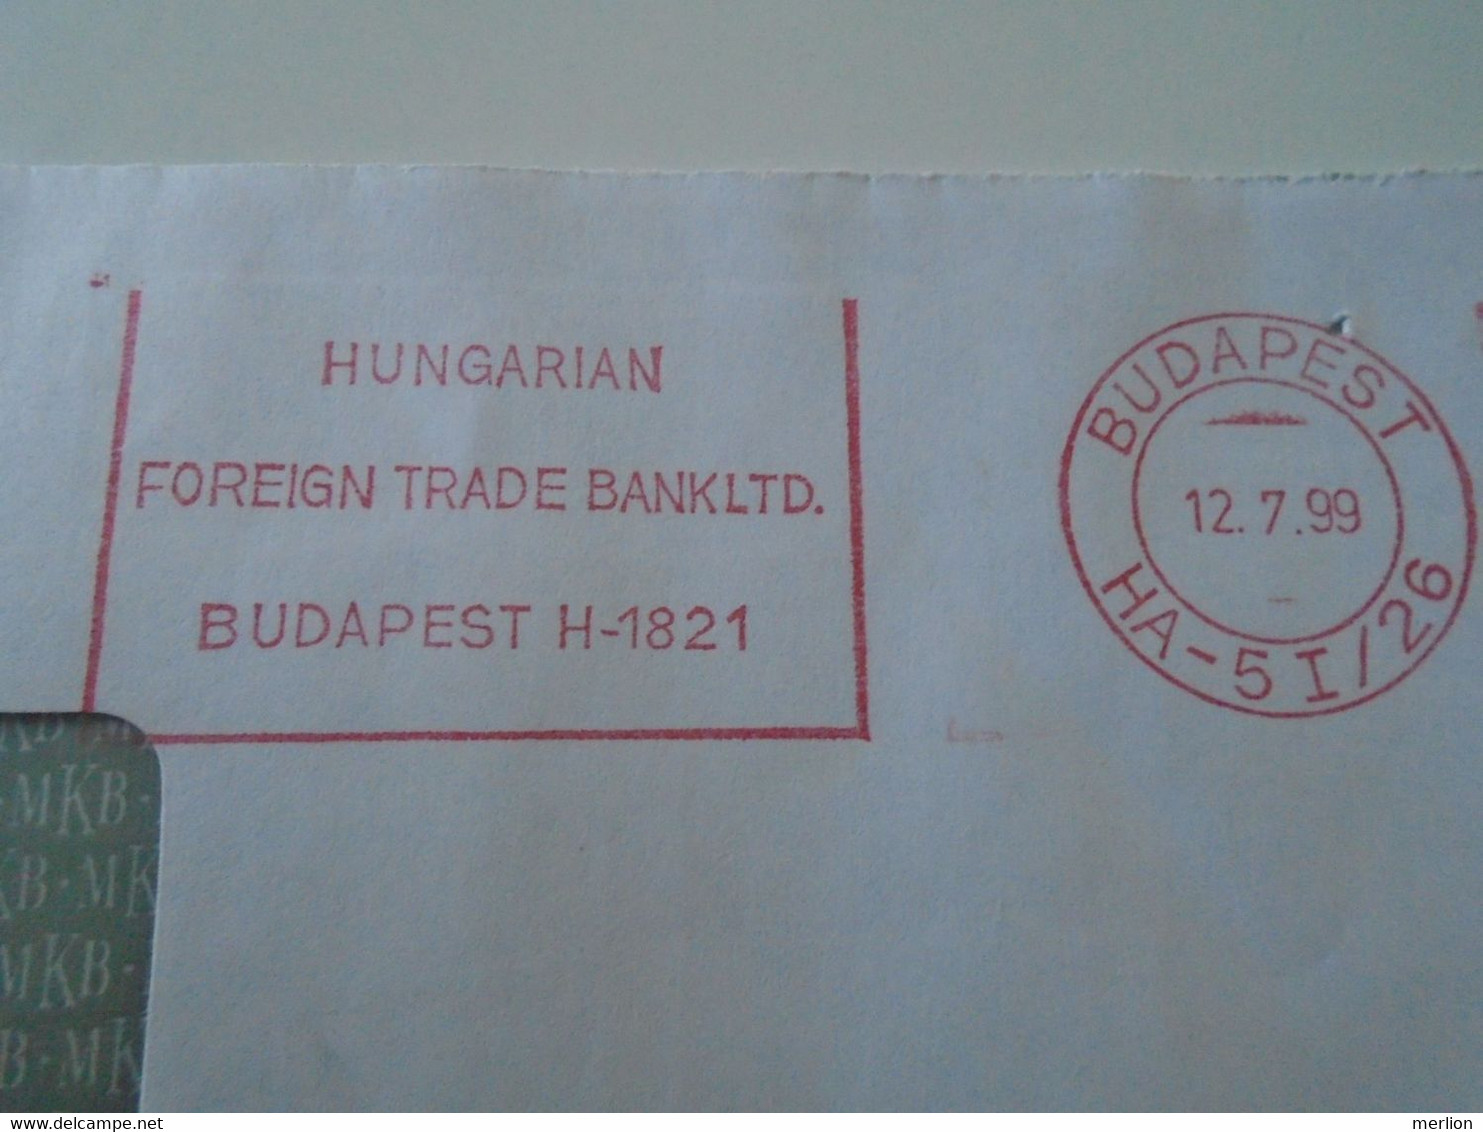 AD00012.119  Hungary Cover  -EMA Red Meter Freistempel-   1999   Budapest  MKB - Hungarian Foreign Trade Bank - Vignette [ATM]